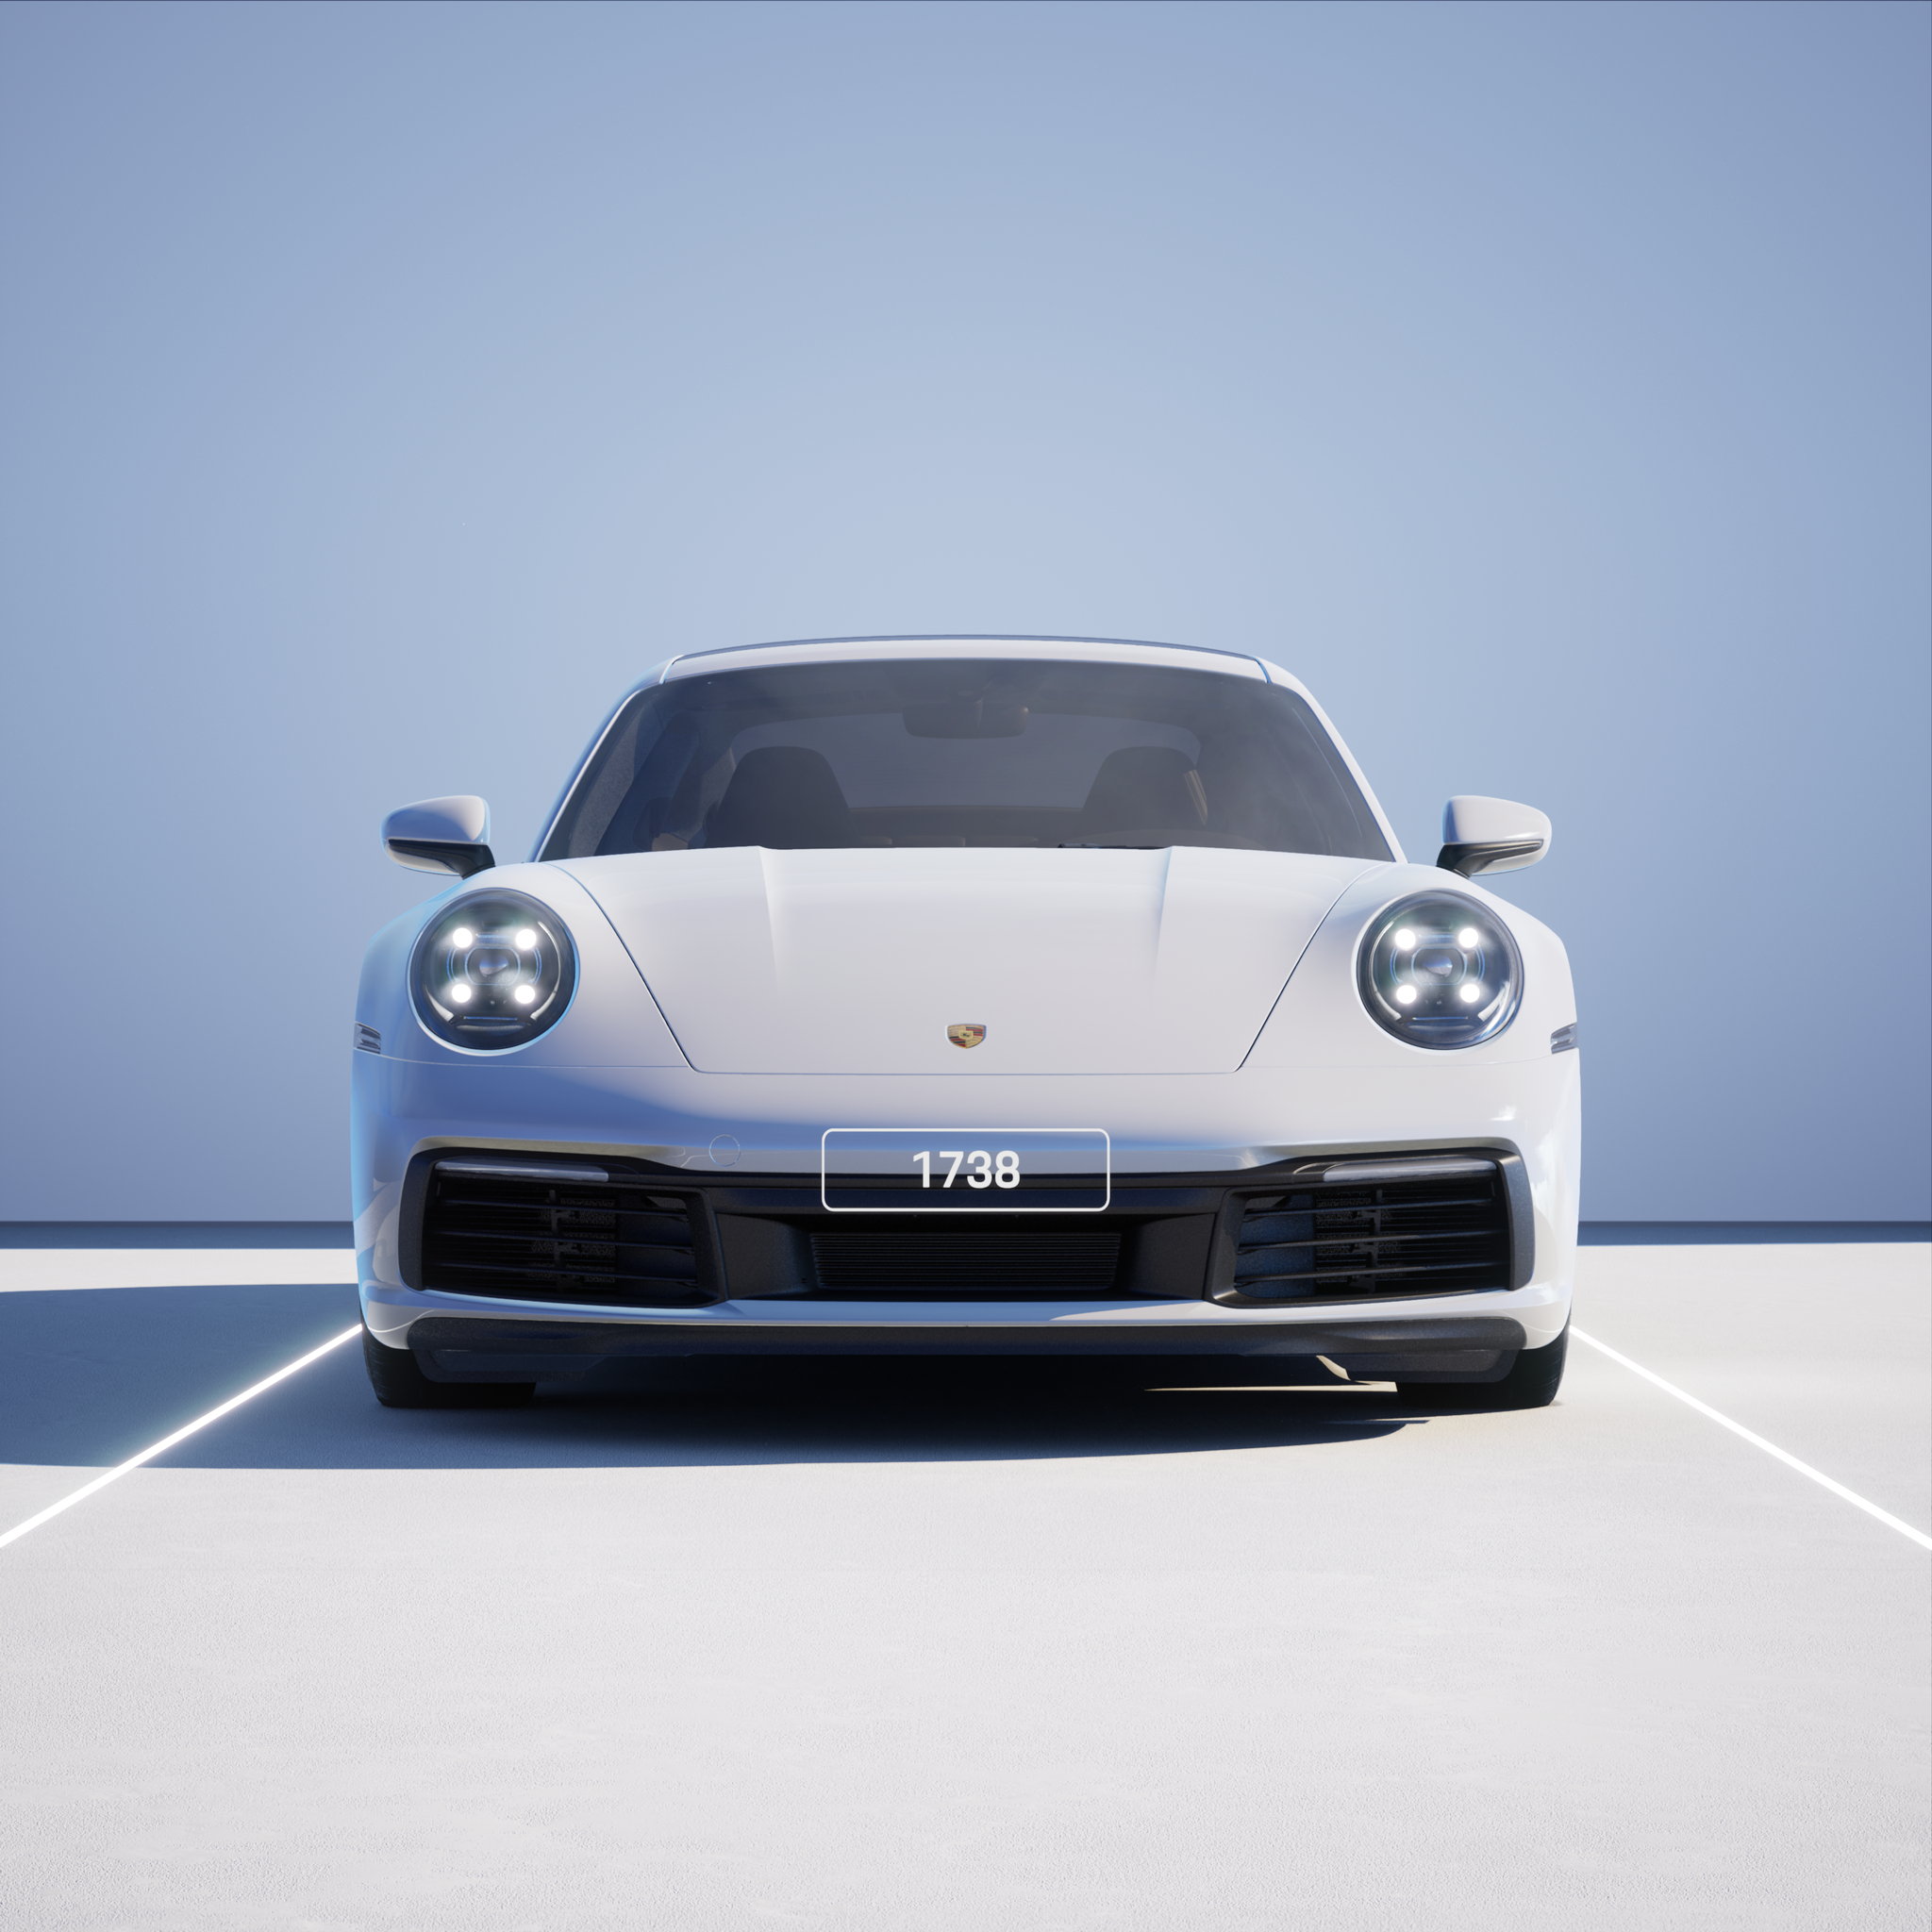 The PORSCHΞ 911 1738 image in phase